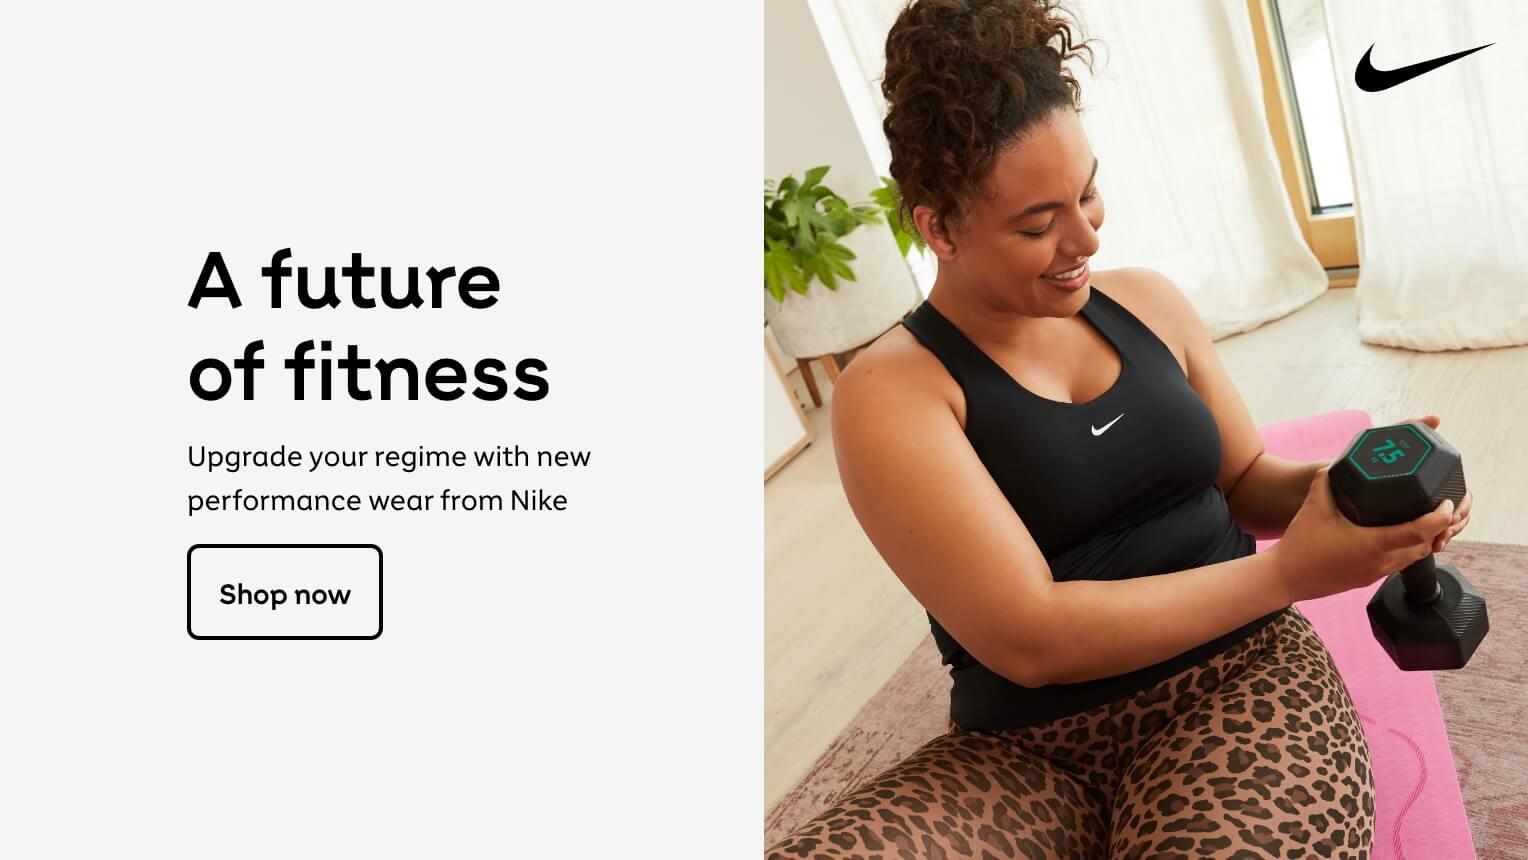 Nike. A future of fitness. Upgrade your regime with new
performance wear from Nike. Shop now.